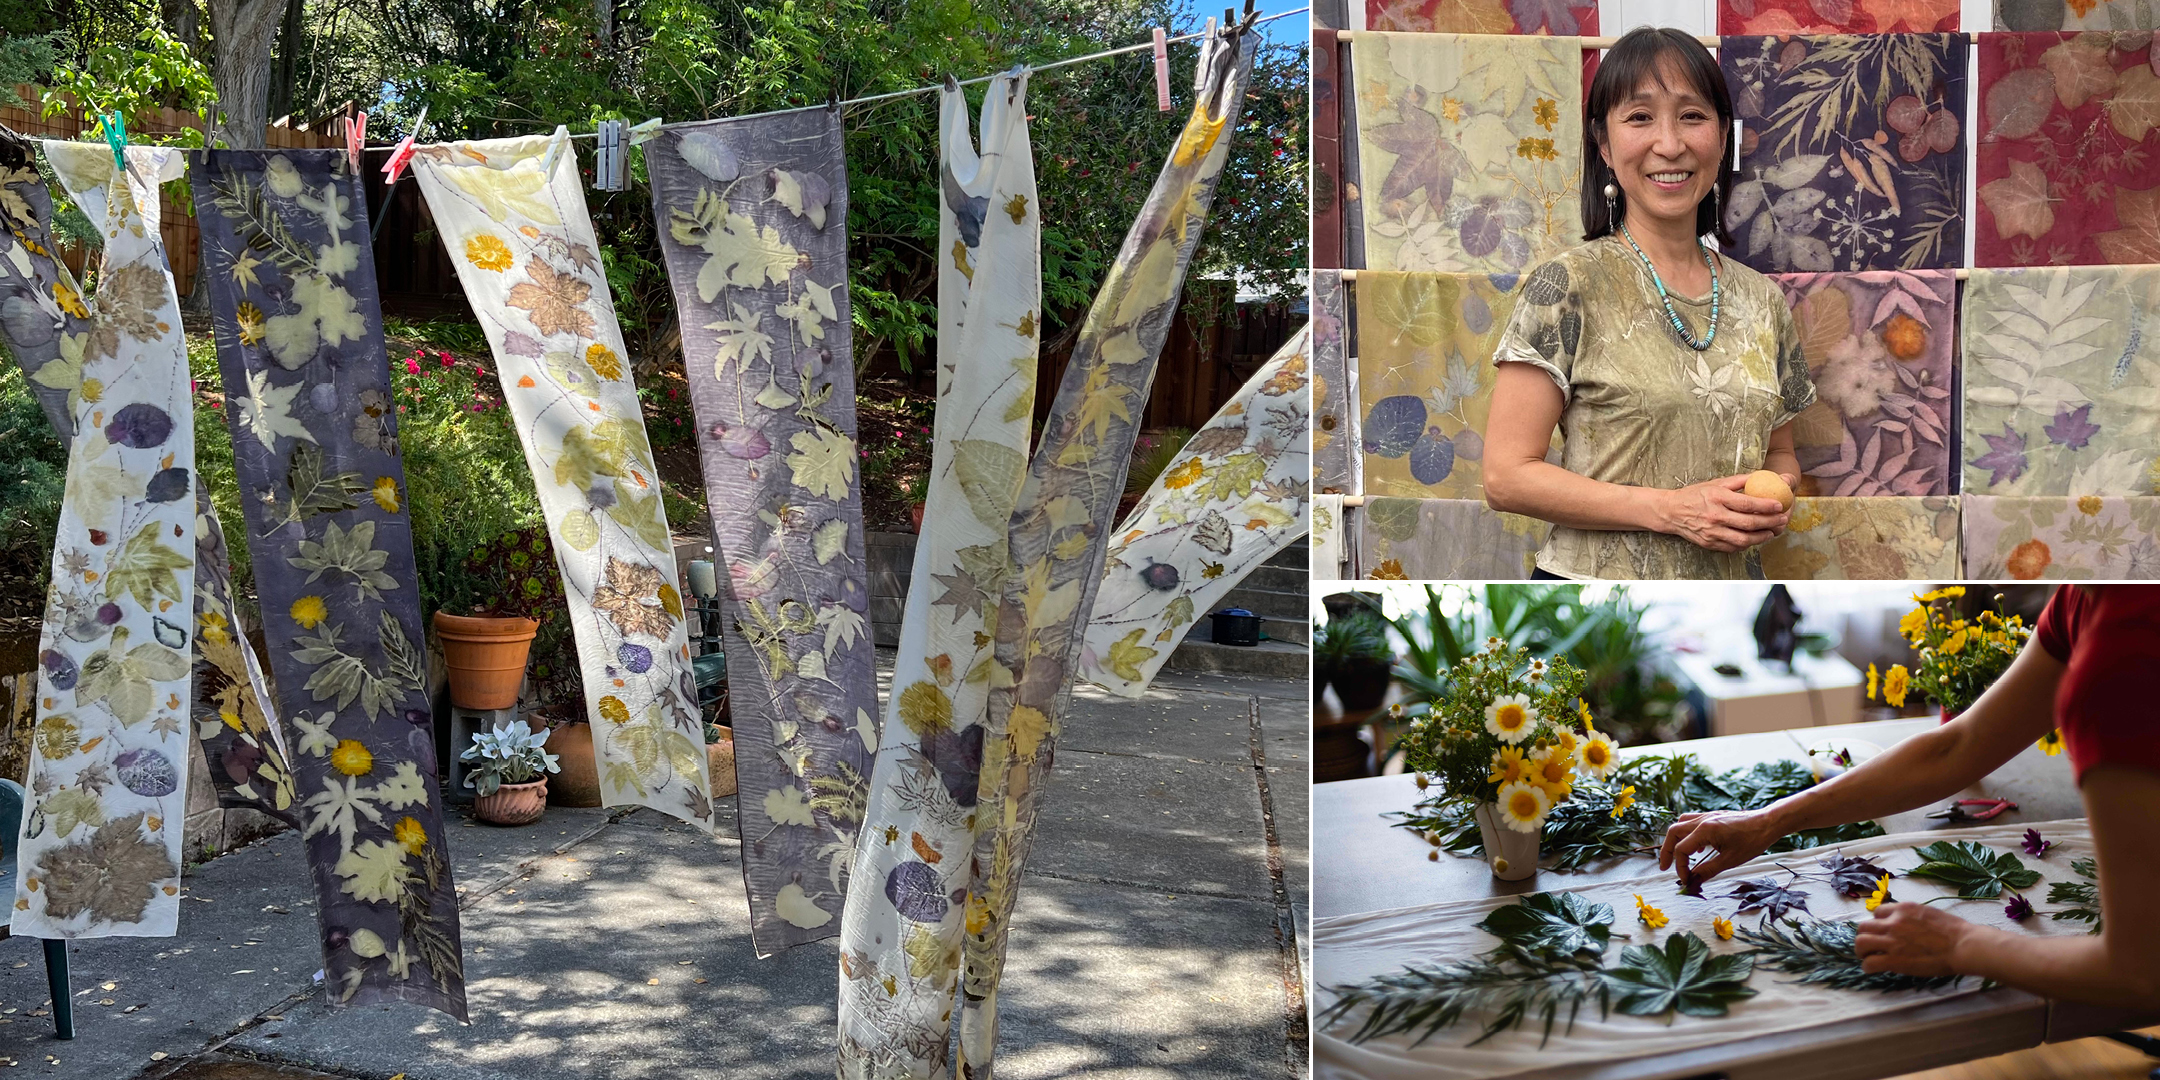 Photos of Mayumi's botanical print scarves, the artist, and layering of plants